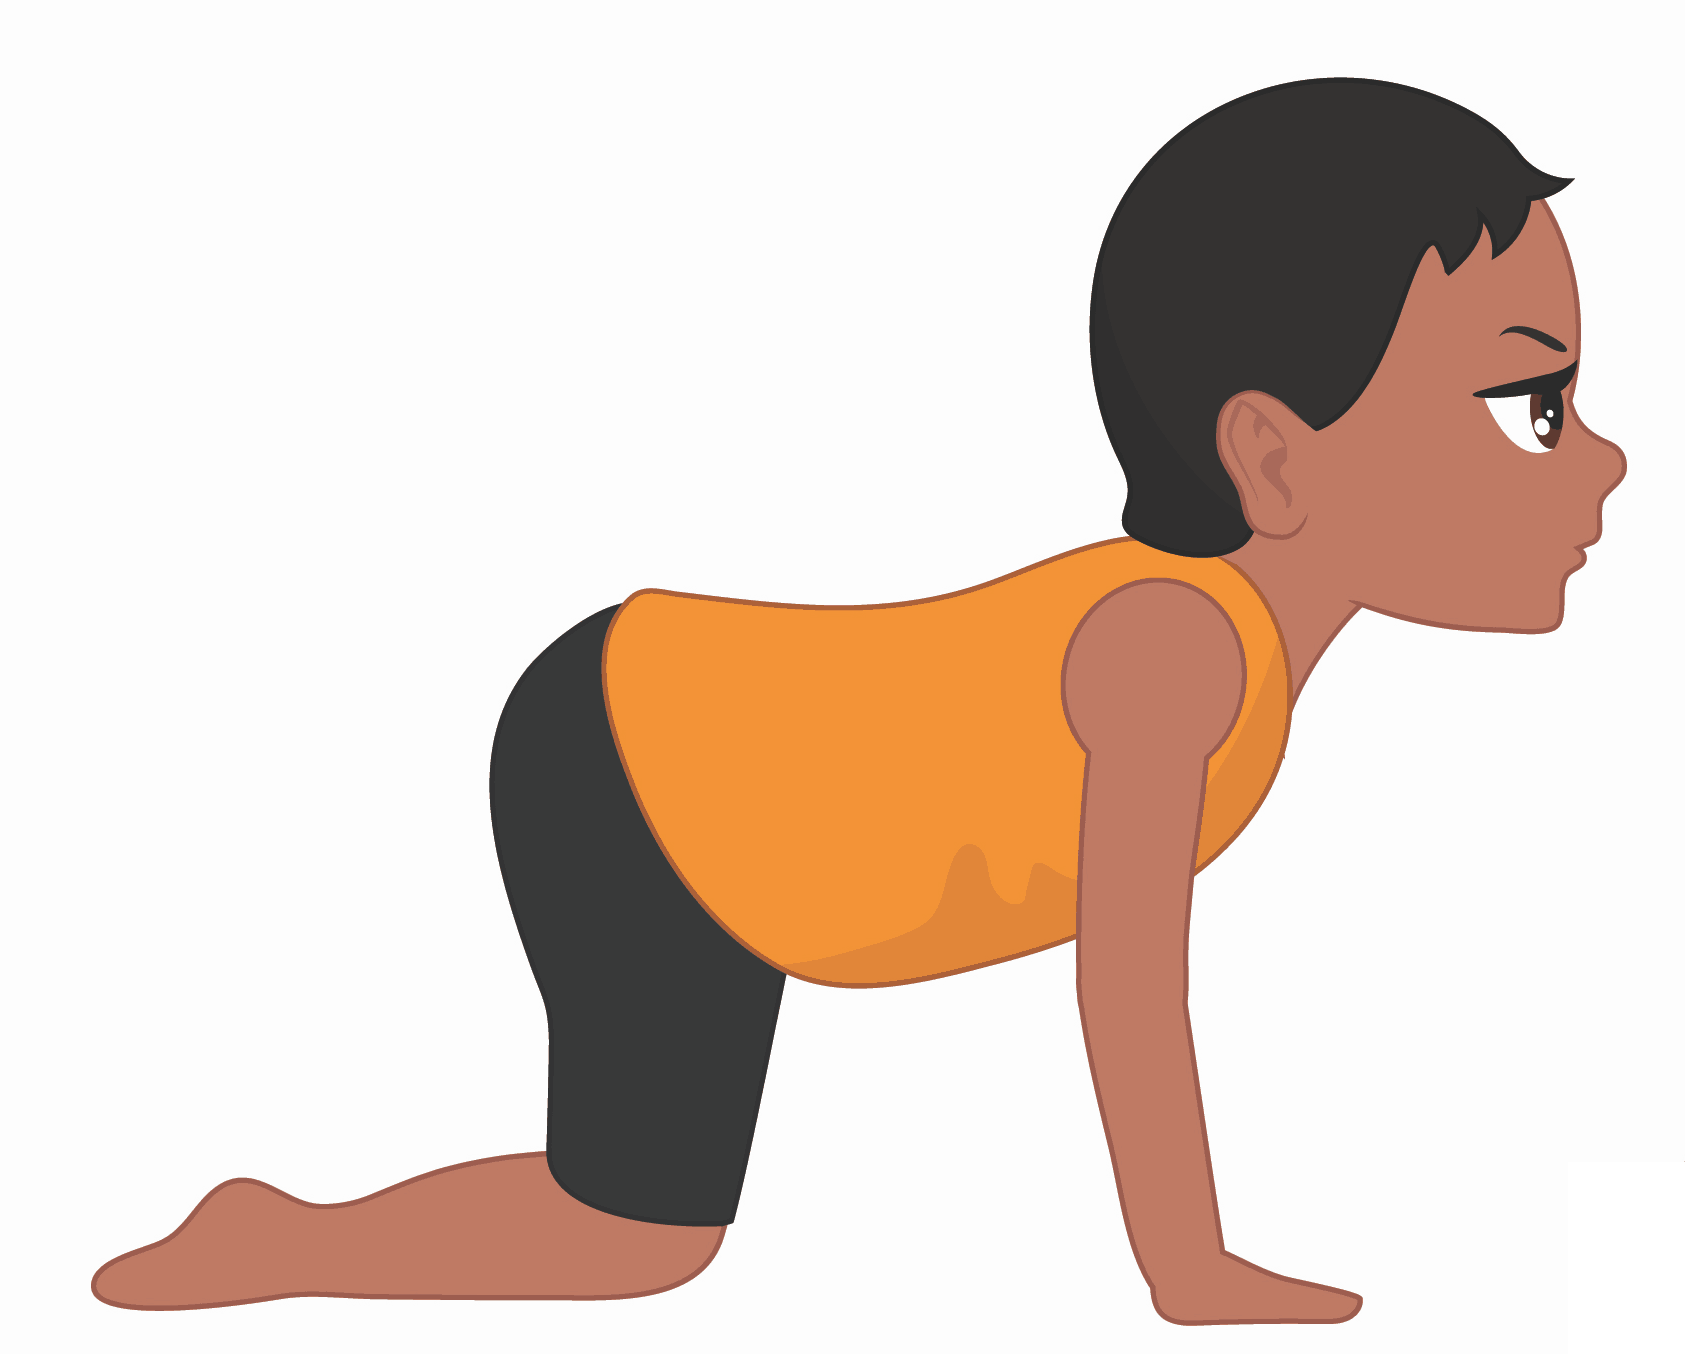 cow pose for kids, kneel on hands and knees and lower your tummy by arching your back and looking forward